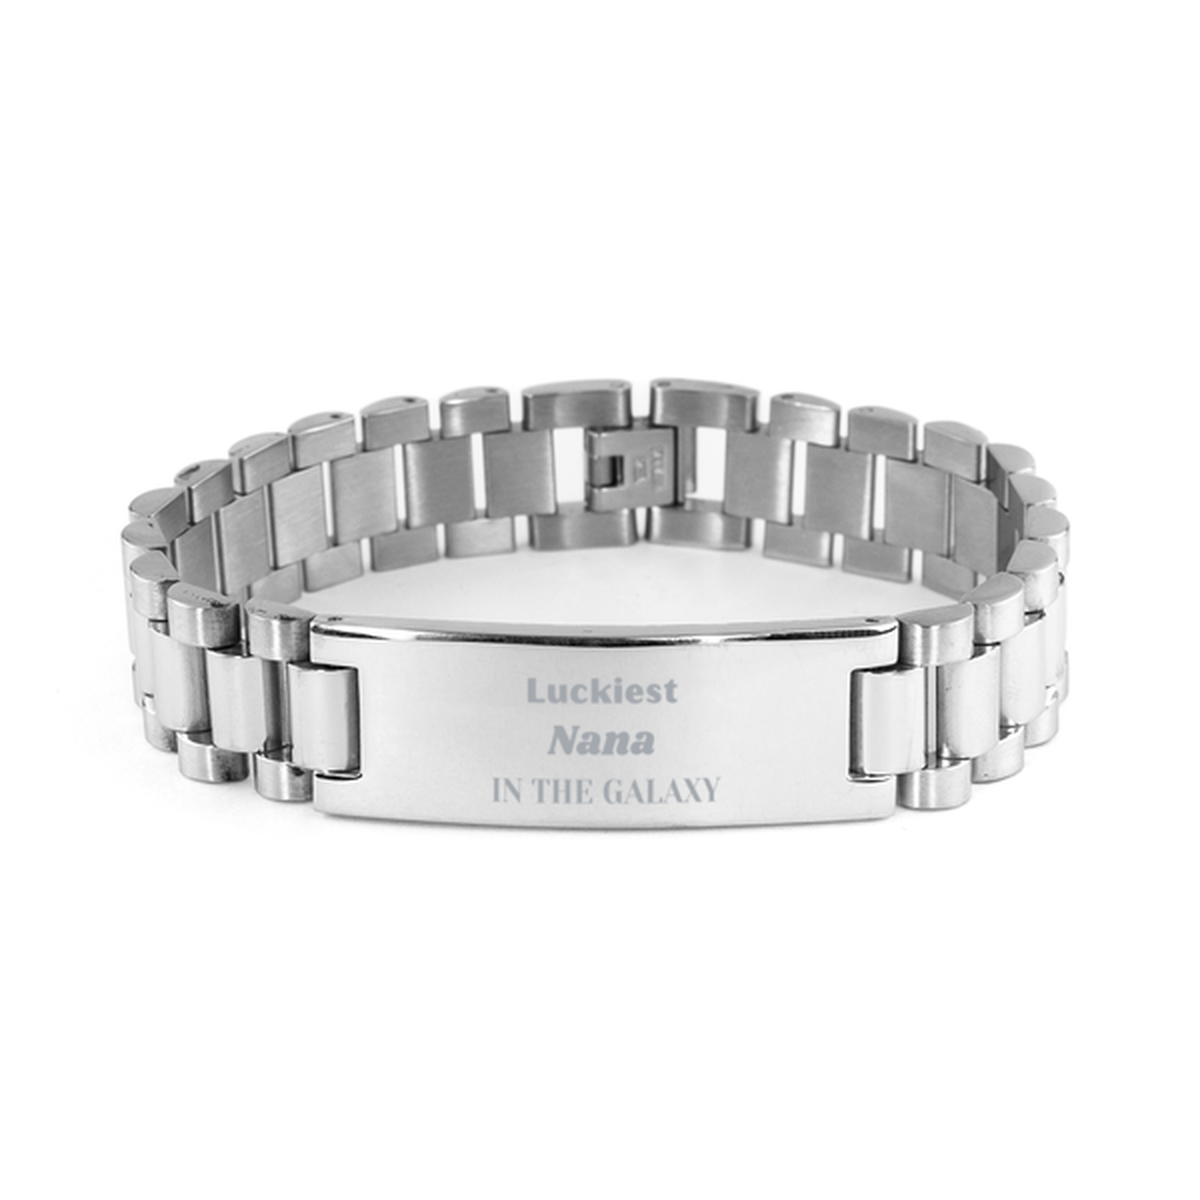 Luckiest Nana in the Galaxy, To My Nana Engraved Gifts, Christmas Nana Ladder Stainless Steel Bracelet Gifts, X-mas Birthday Unique Gifts For Nana Men Women